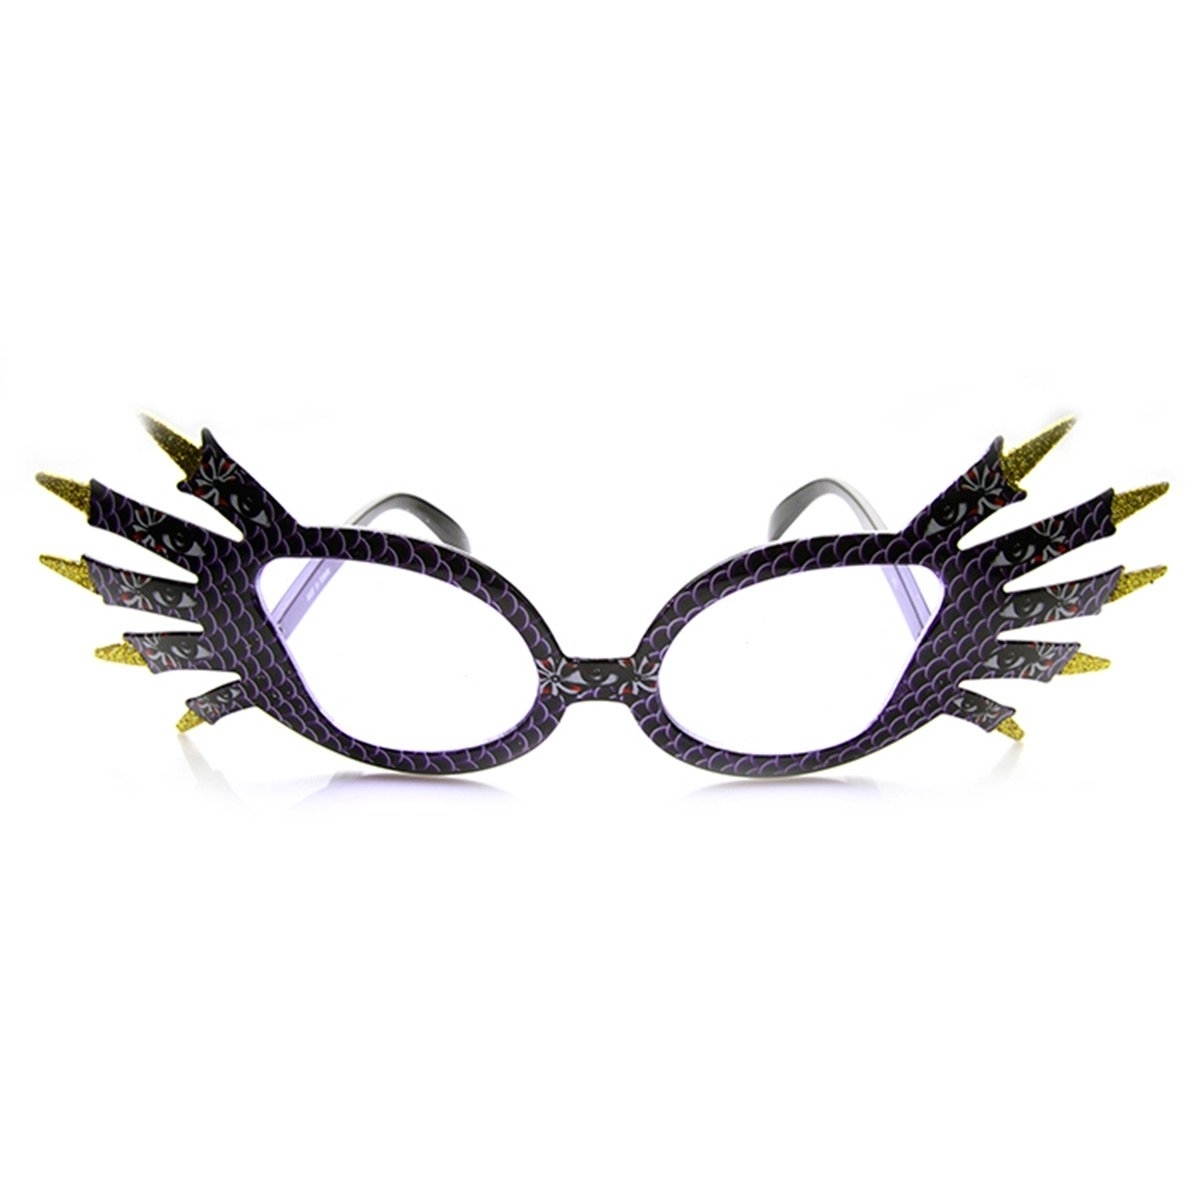 Dragon Claws Hydra Scales Monster Novelty Party Sunglasses - Orange Orange